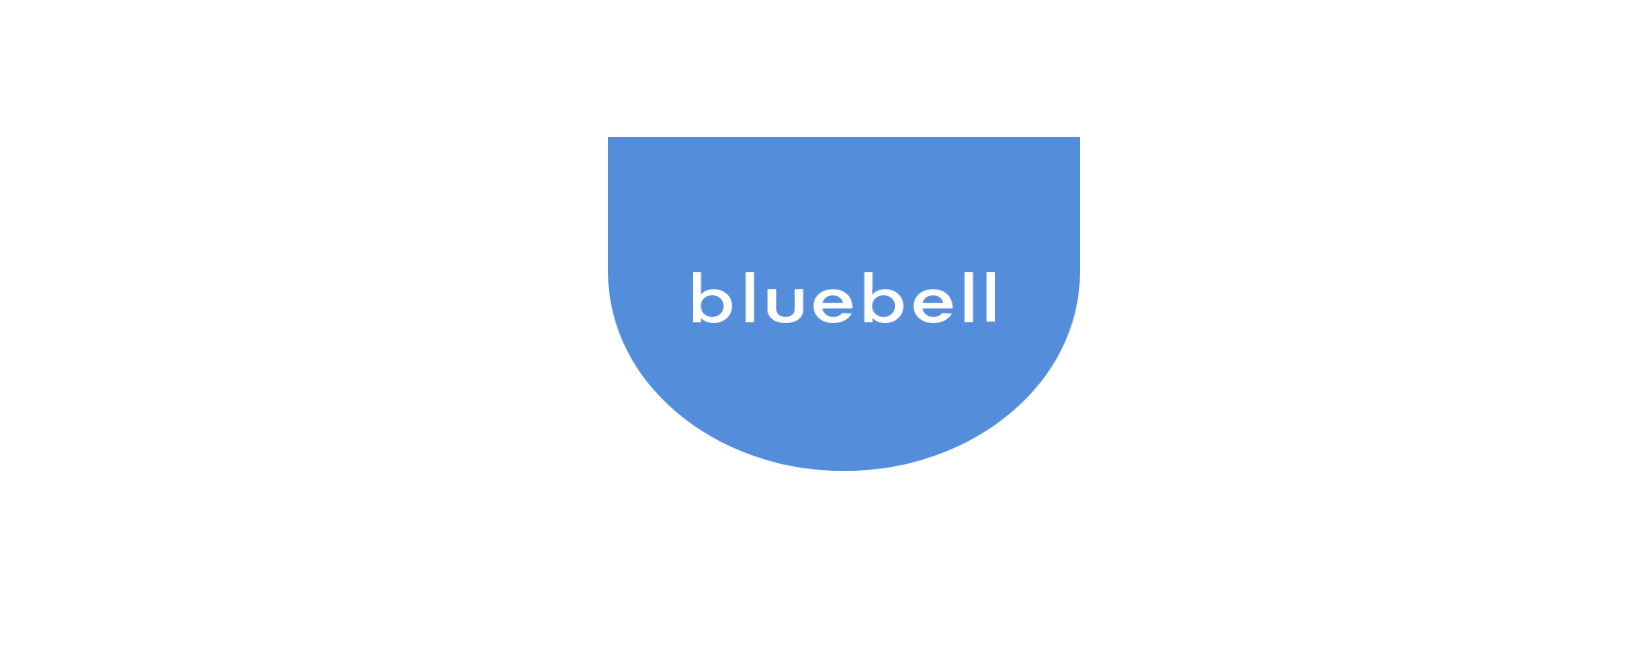 Bluebell Discount Codes 2022